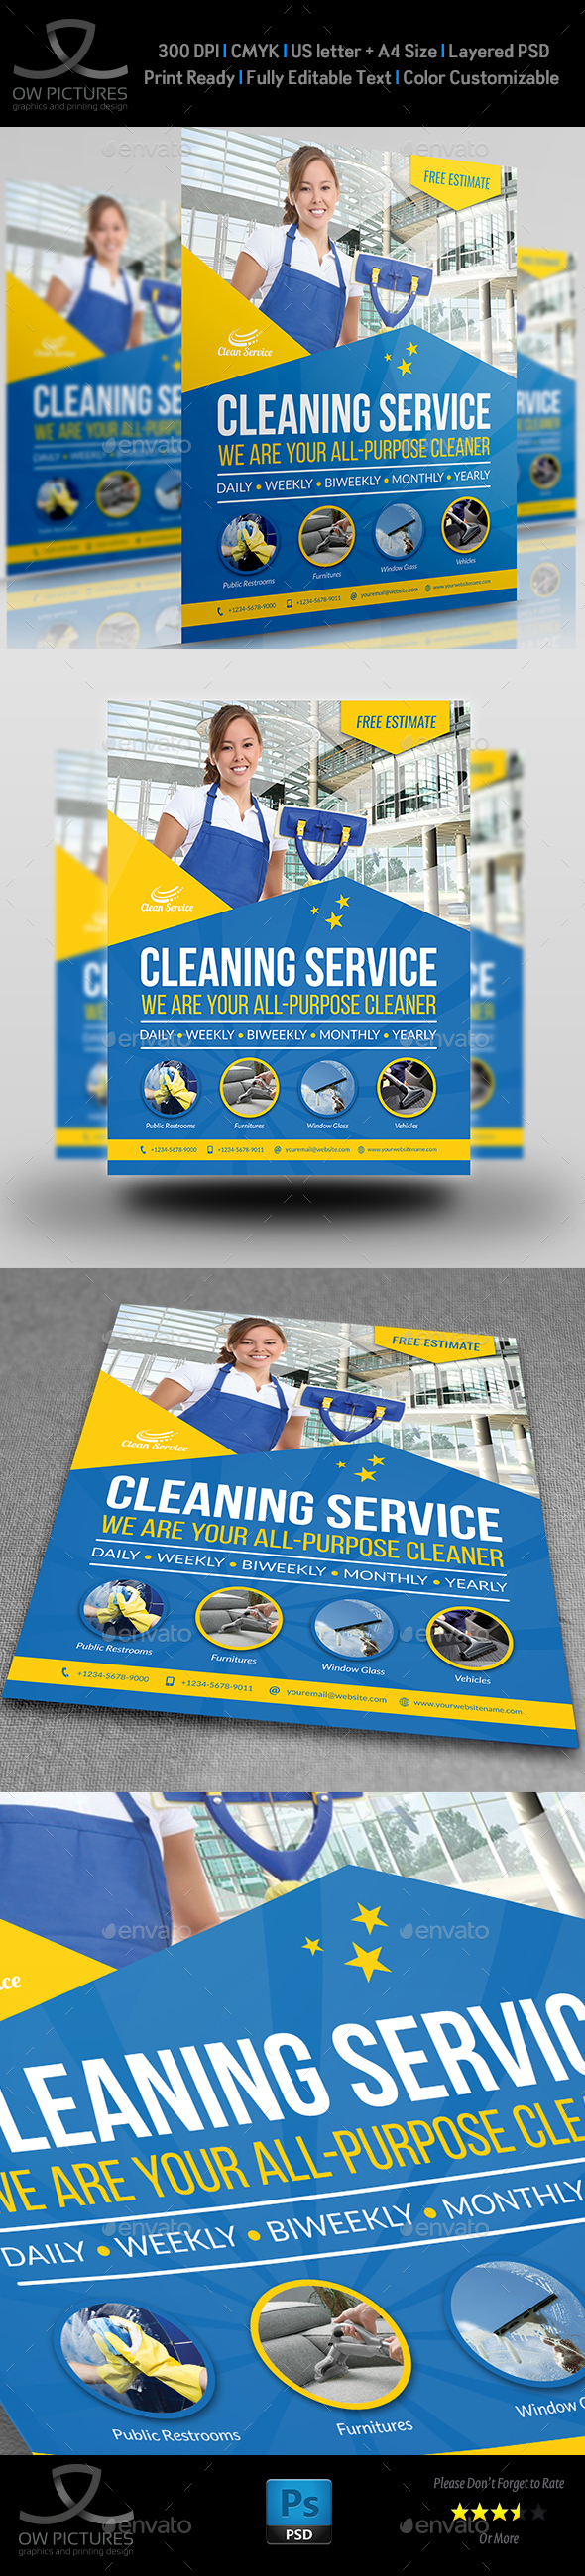 Cleaning Services Flyer Template Vol.4